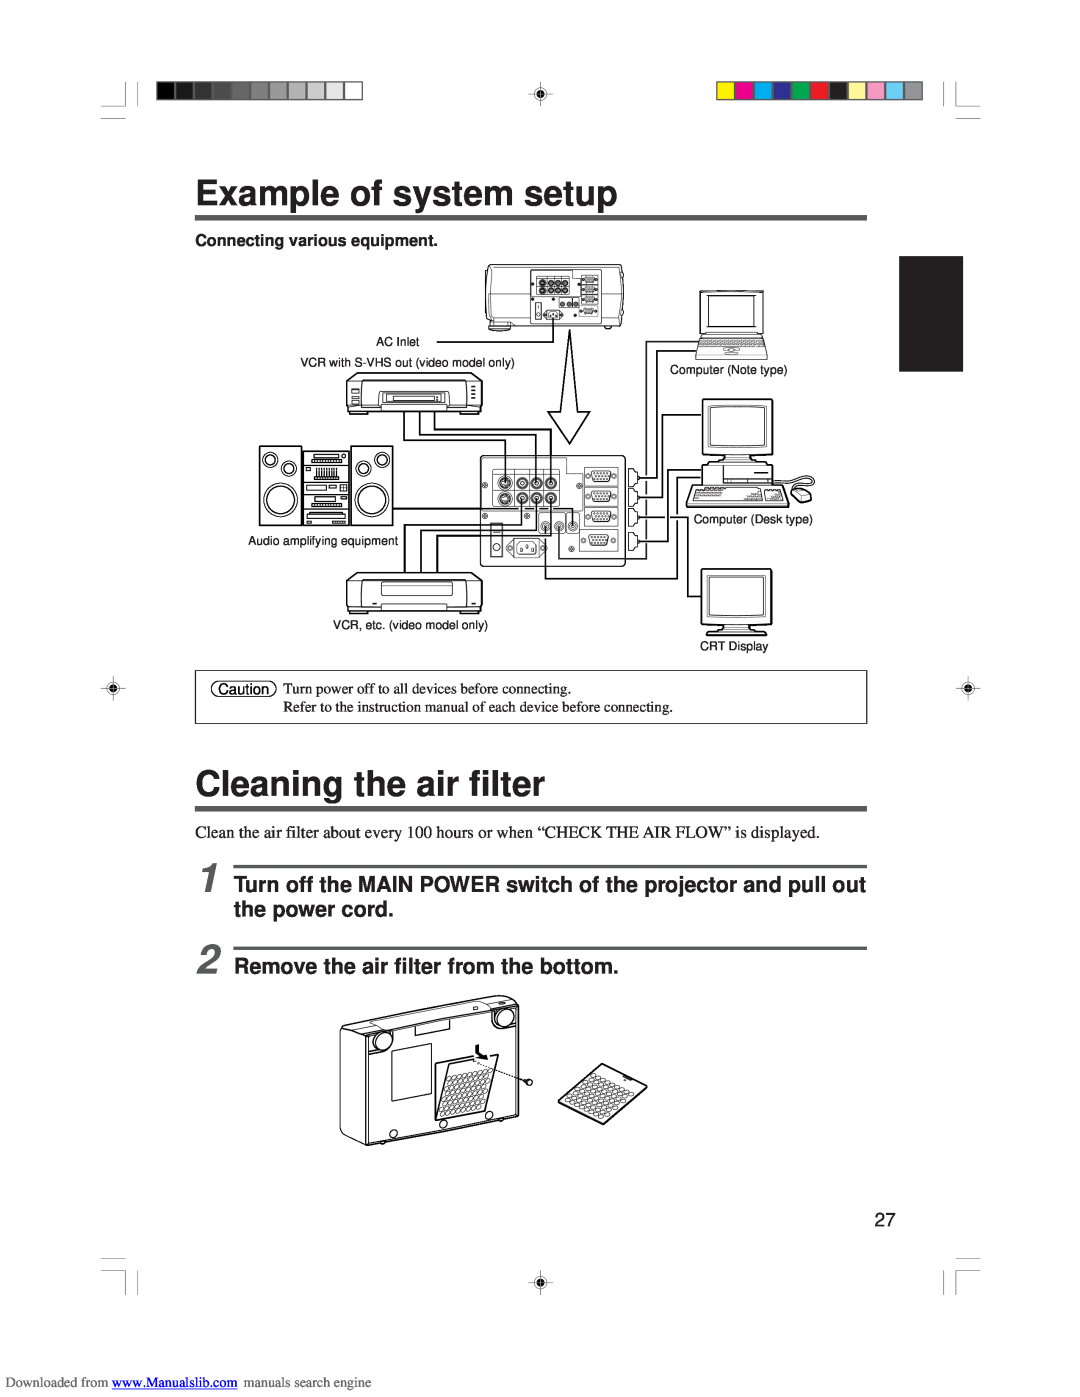 Hitachi CP-X955E specifications Example of system setup, Cleaning the air filter, Remove the air filter from the bottom 